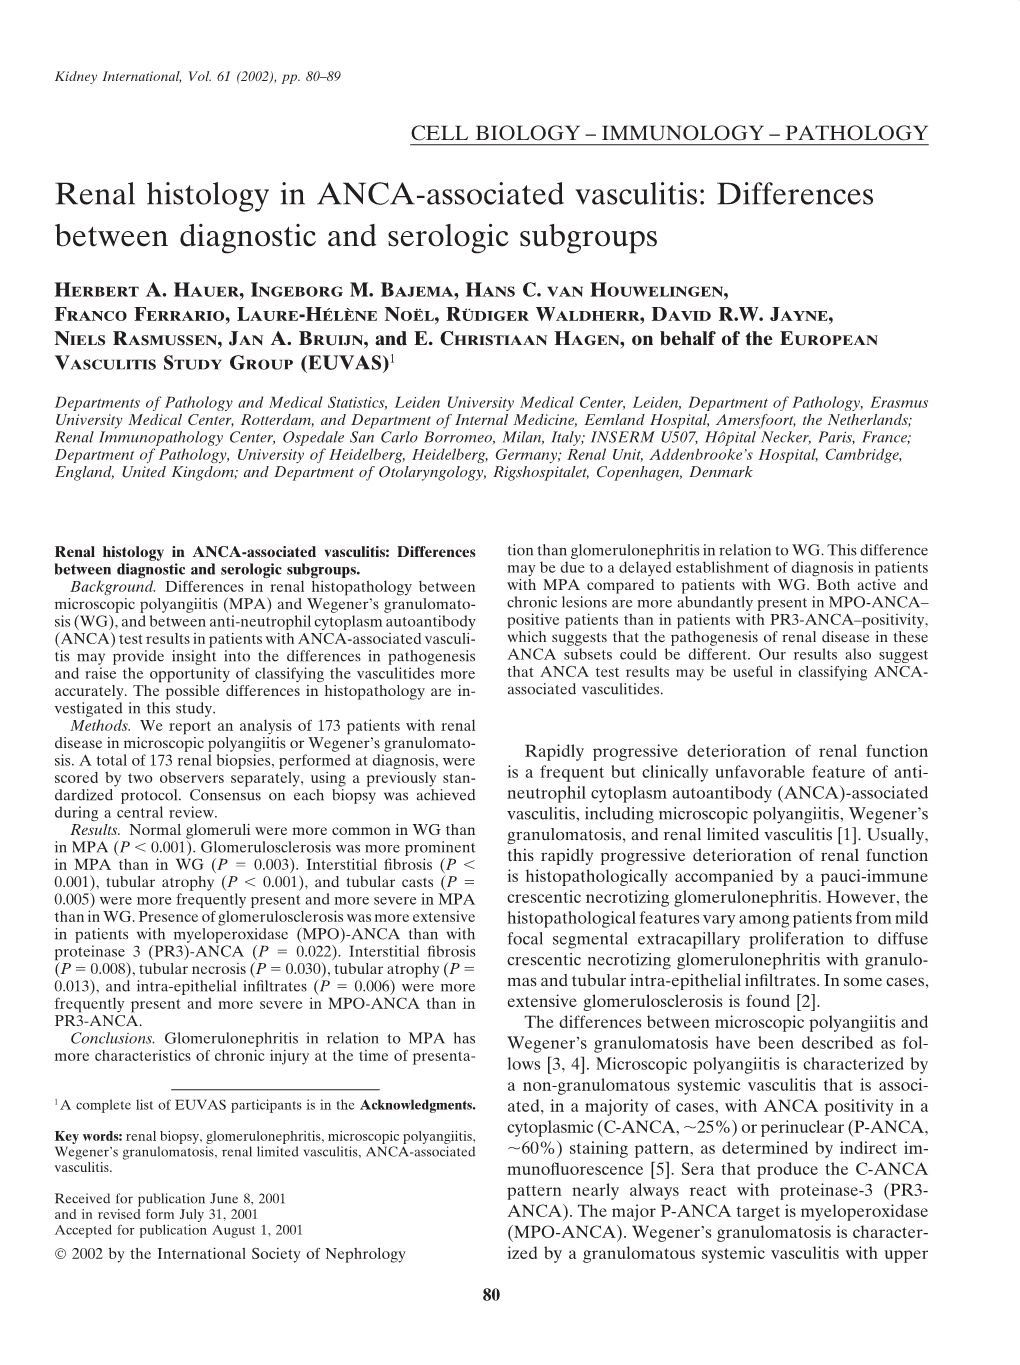 Renal Histology in ANCA-Associated Vasculitis: Differences Between Diagnostic and Serologic Subgroups